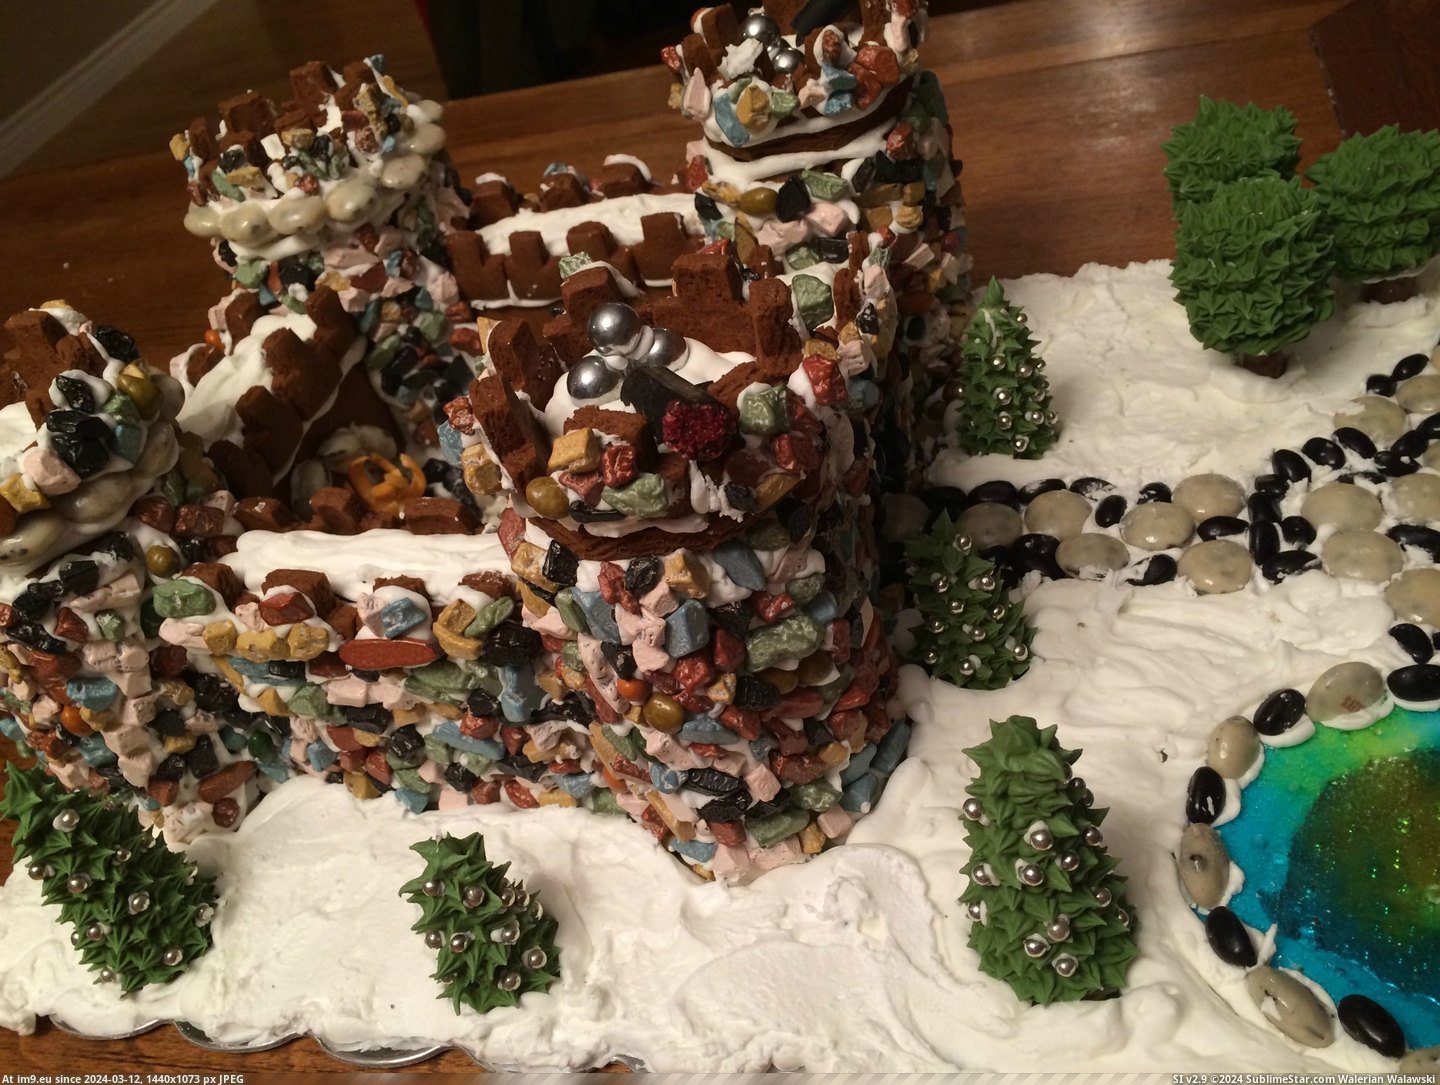 #Husband #Get #Our #Divorced #Collaborated #Project #Gingerbread #Success [Pics] My husband and I collaborated on our first gingerbread project and didn't get divorced...success! 9 Pic. (Изображение из альбом My r/PICS favs))